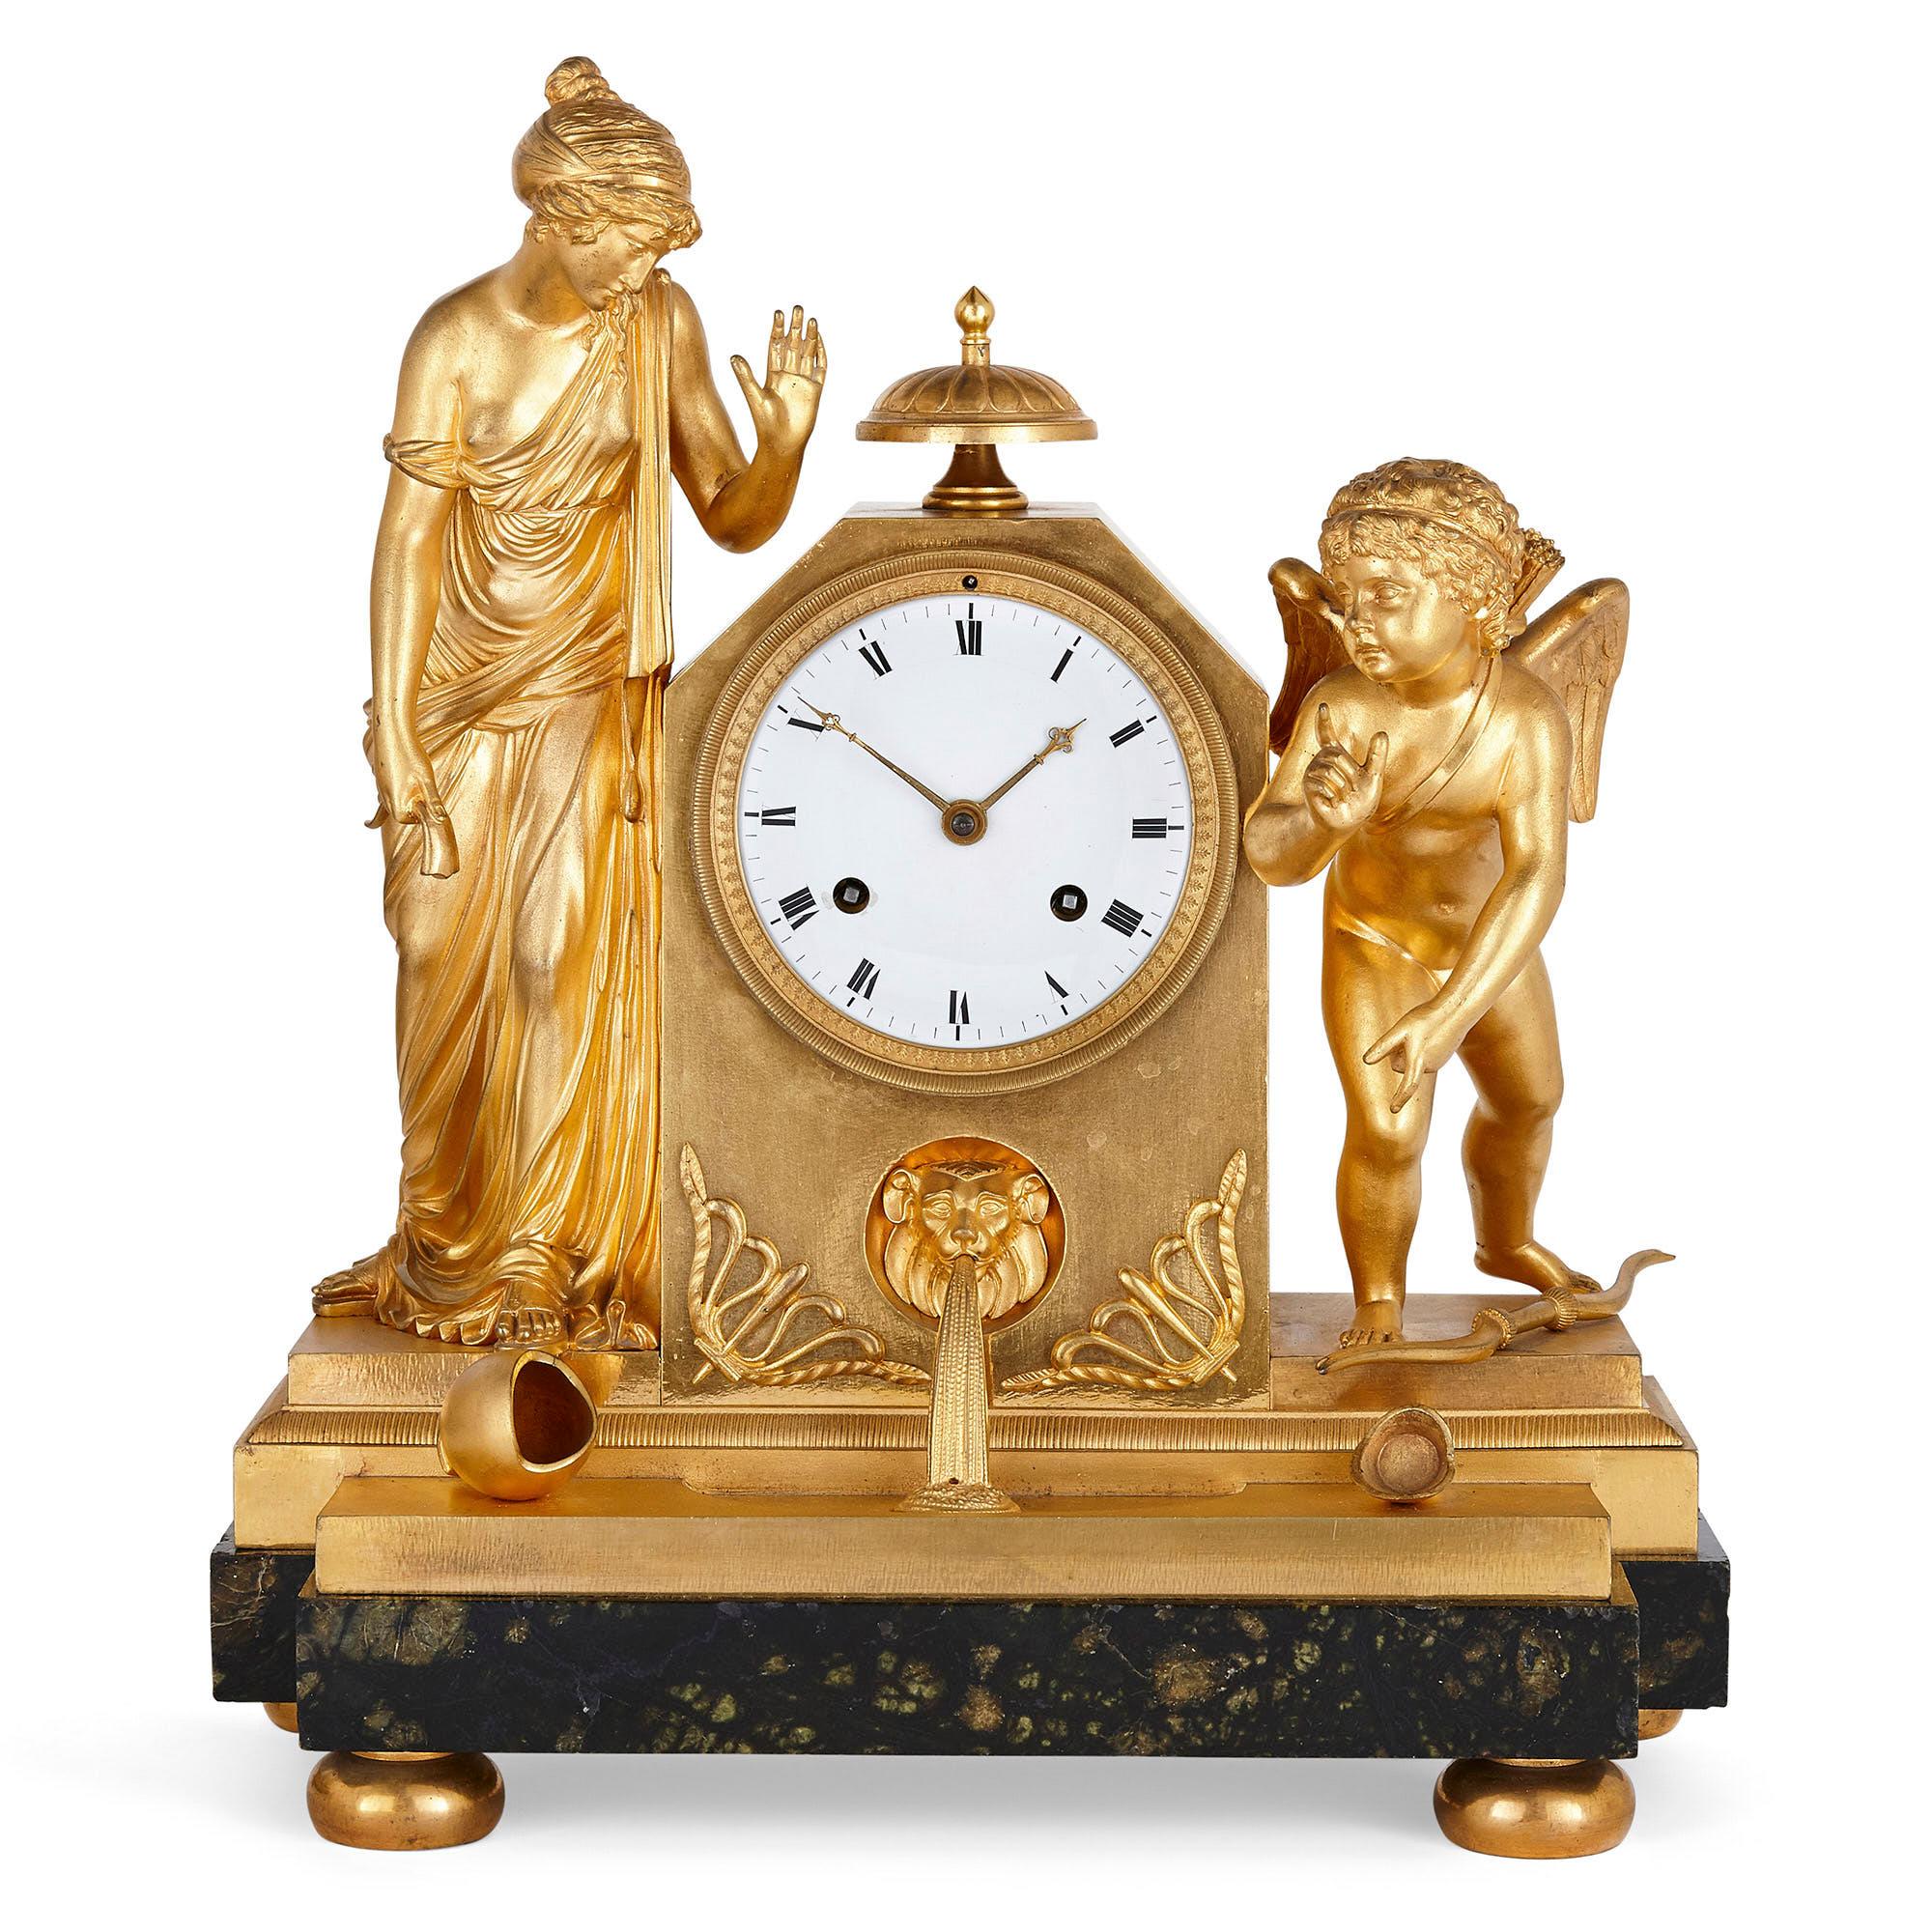 French gilt bronze mantel clock with Classical figures
French, 19th century
Measures: Height 45cm, width 39cm, depth 17cm

This mantel clock features fine gilt bronze Classical style figures either side of the dial, masterfully cast in the